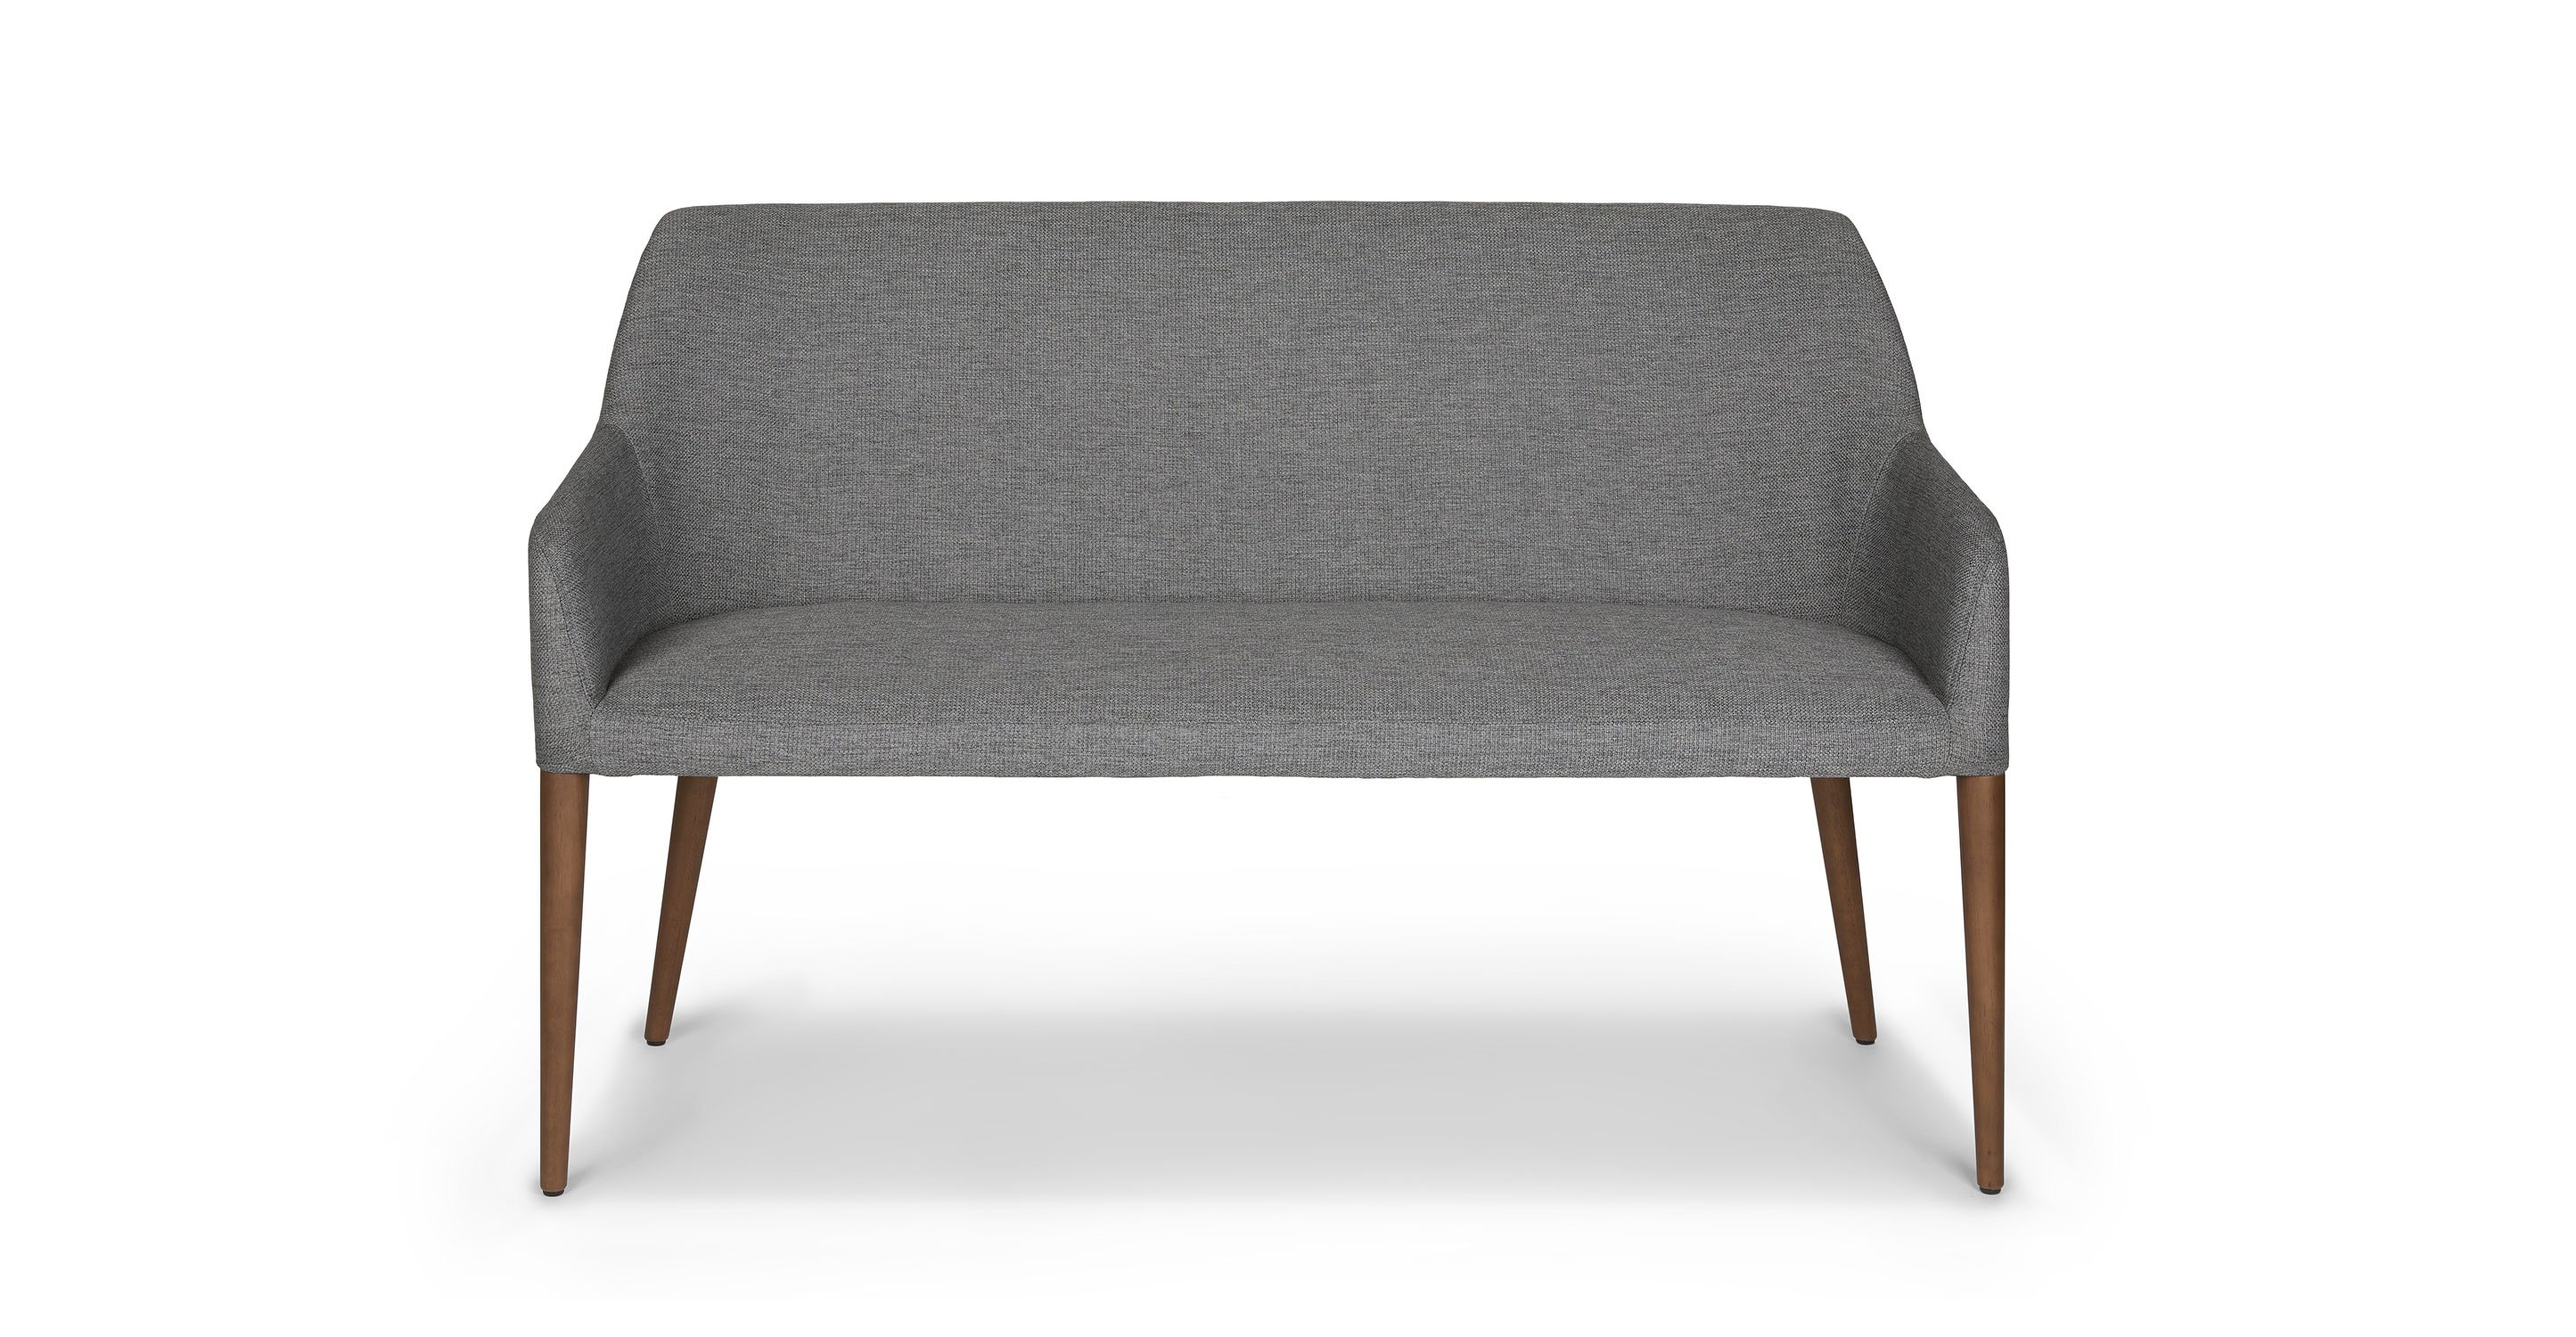 Feast Gravel Gray Dining Bench - Article